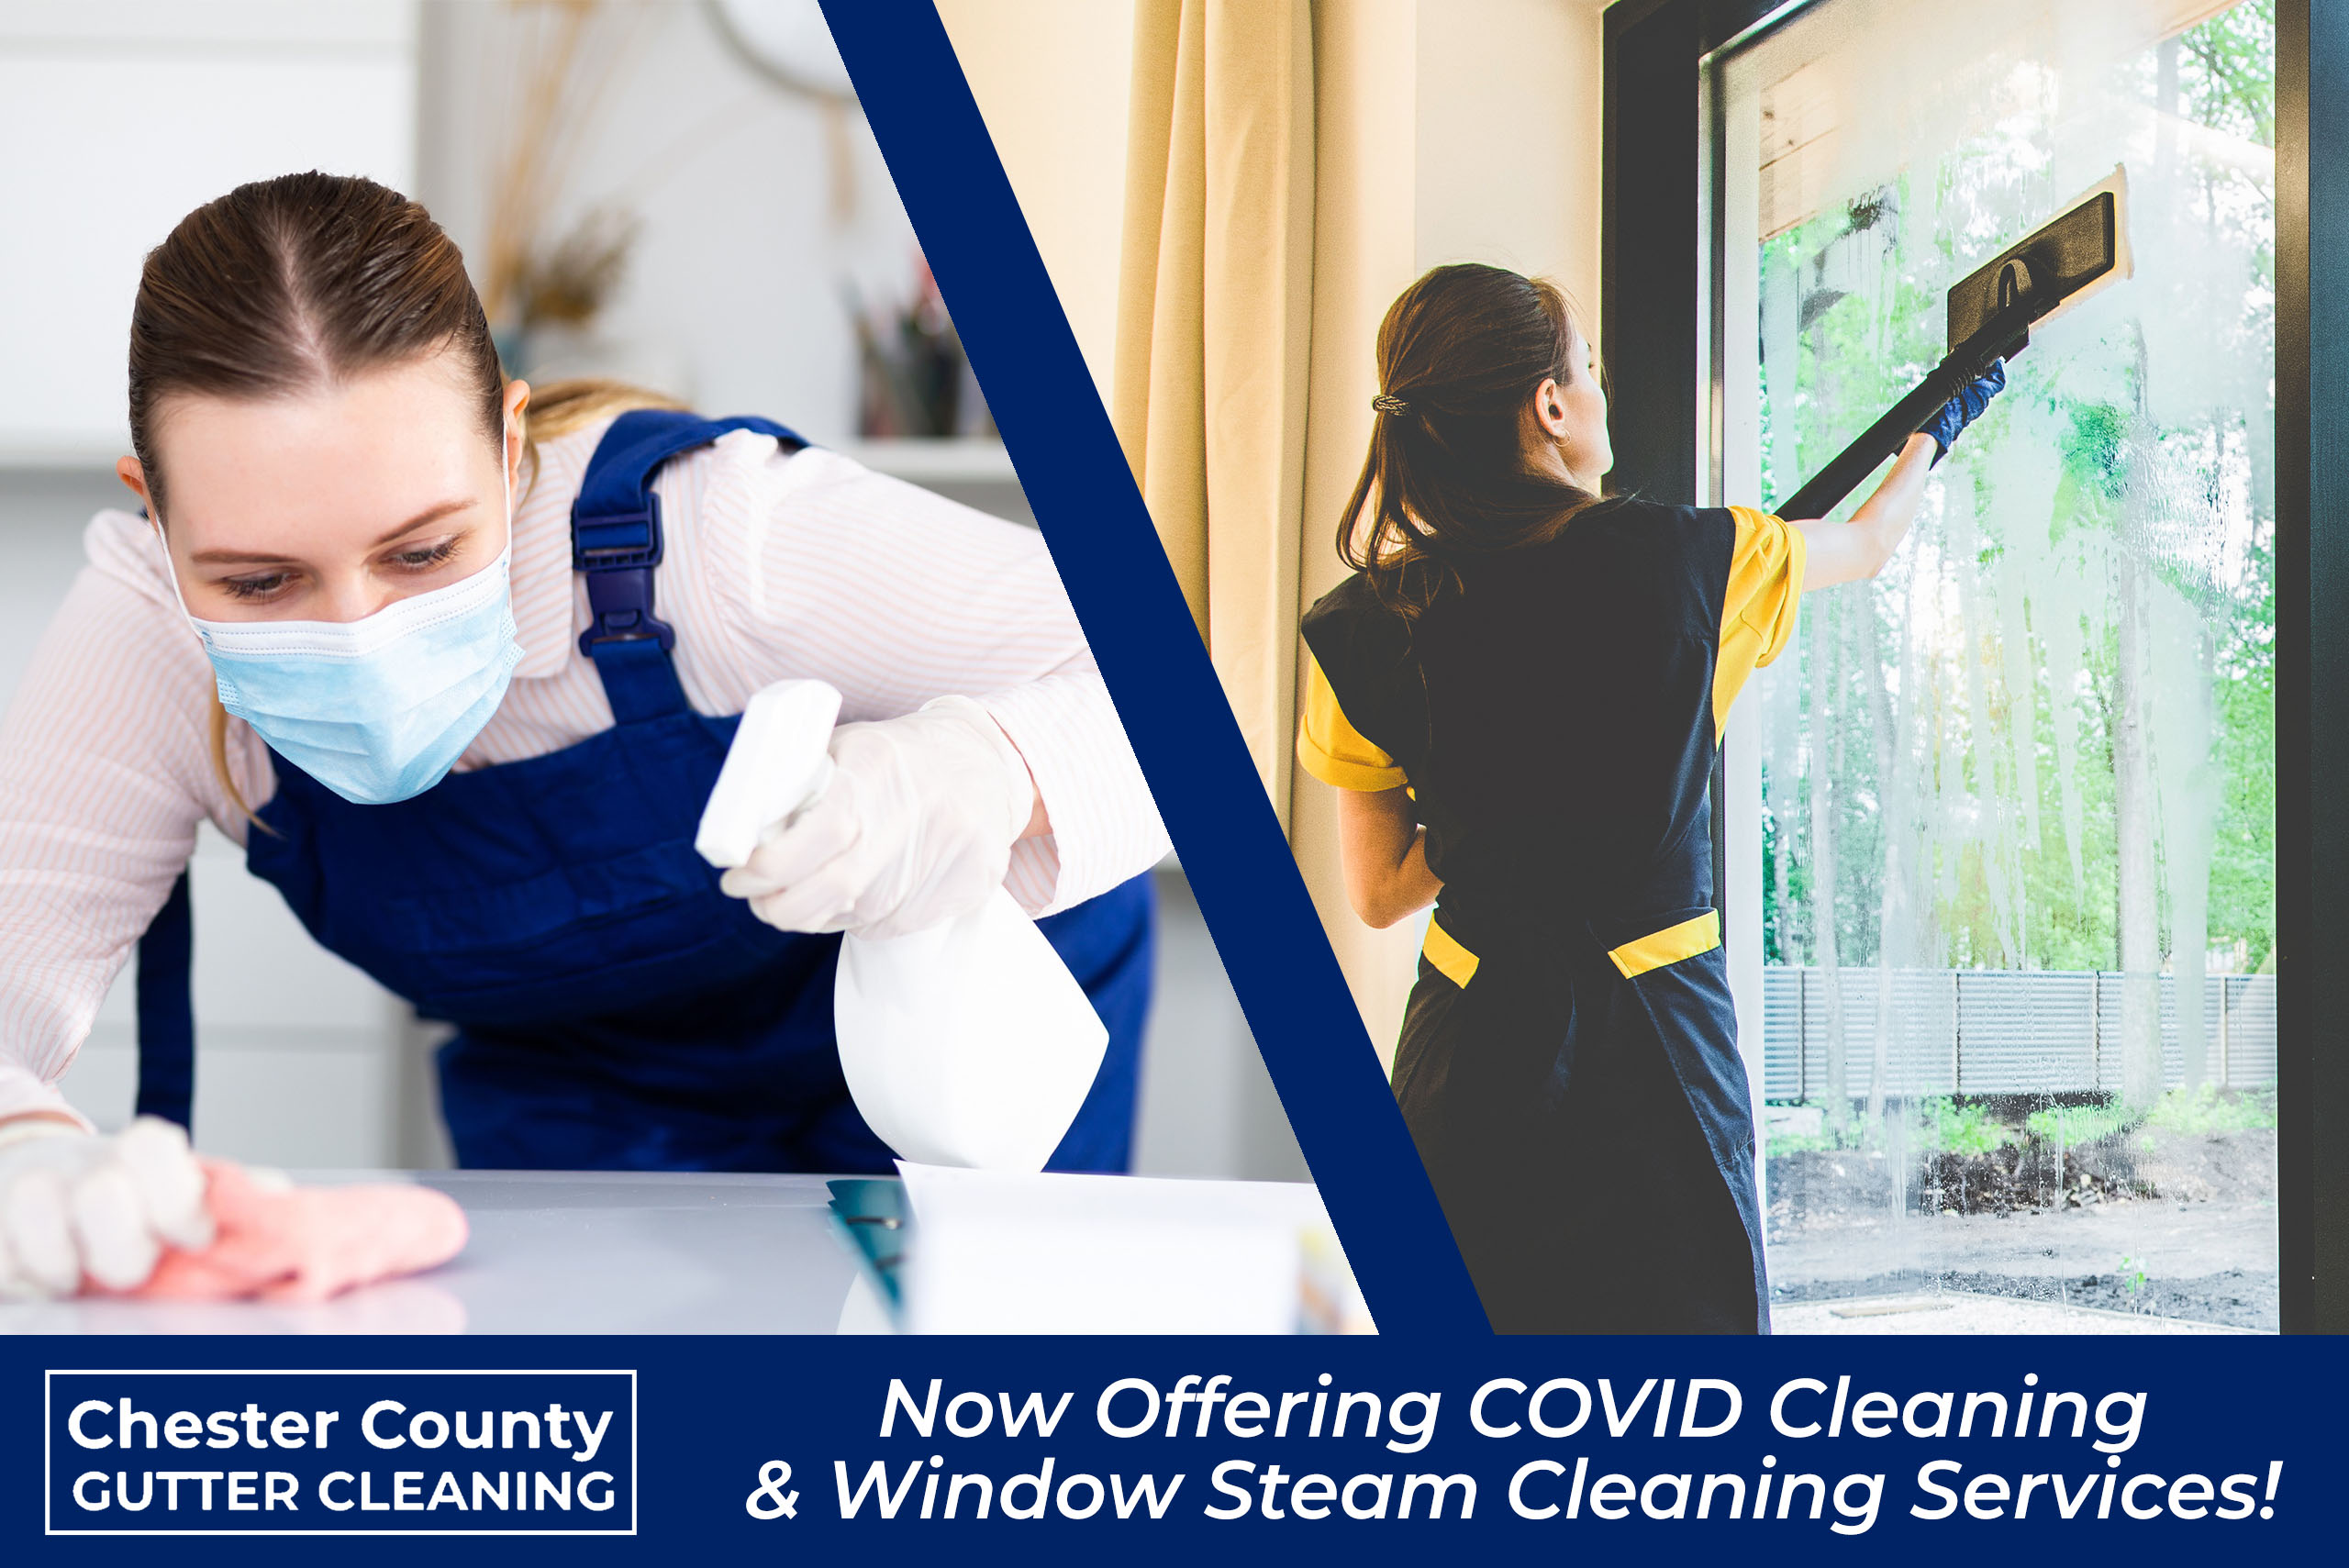 Window Cleaning & COVID Cleaning Services